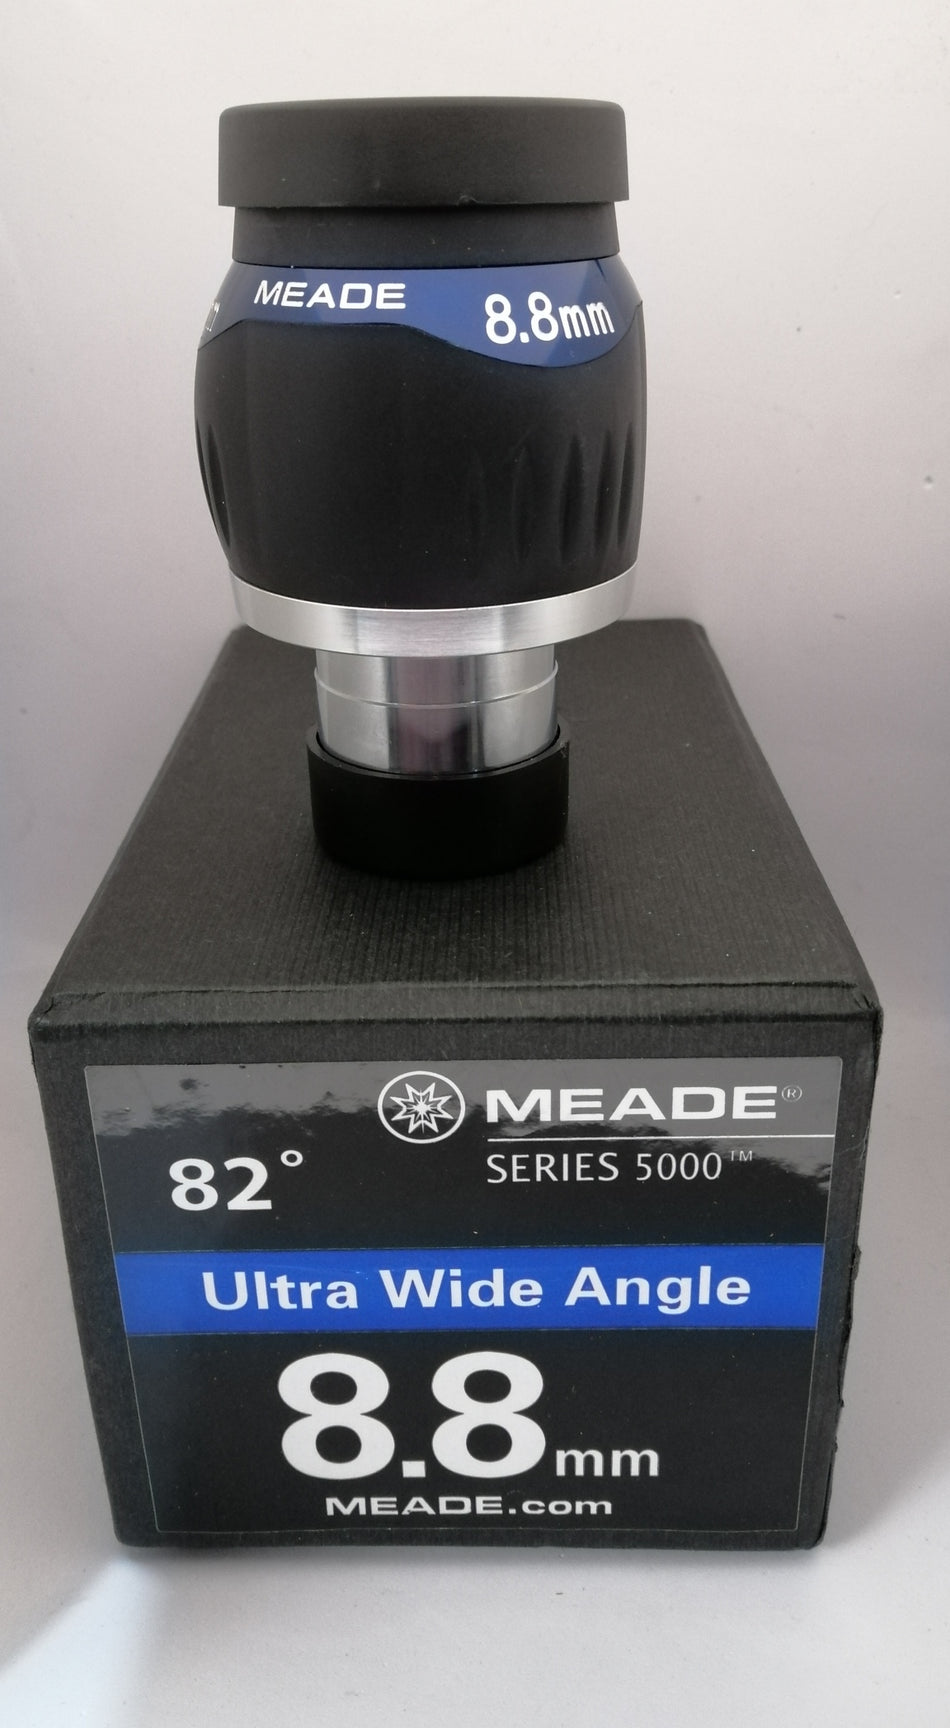 Meade Series 5000 Ultra Wide Angle 8.8mm Eyepiece -1.25" (OPEN BOX)